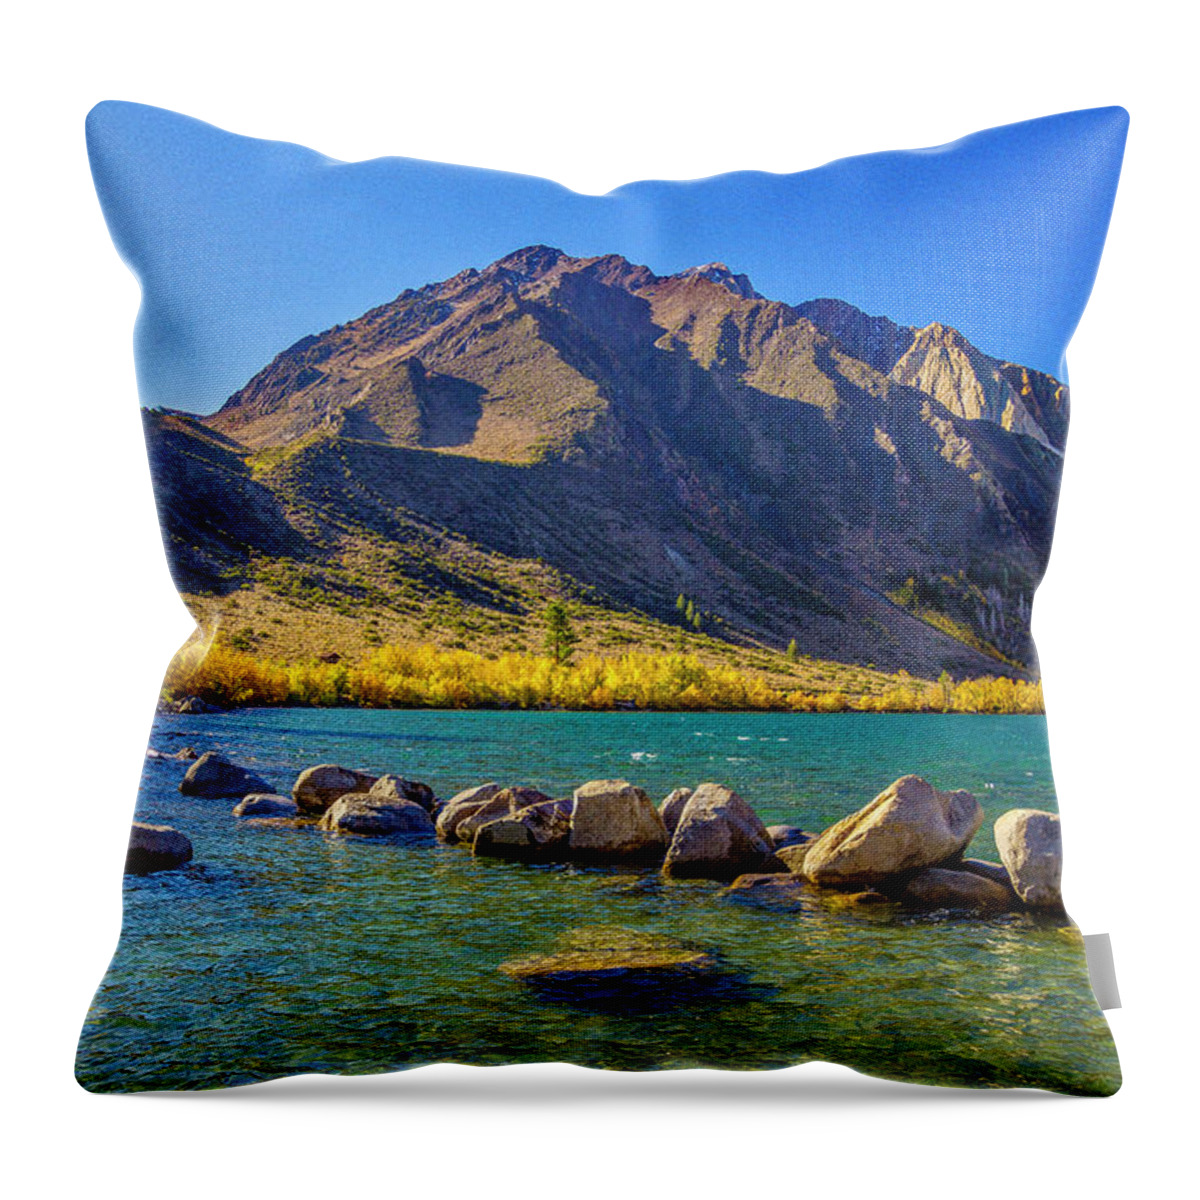 California Throw Pillow featuring the photograph Convict Lake Eastern Sierras by Donald Pash